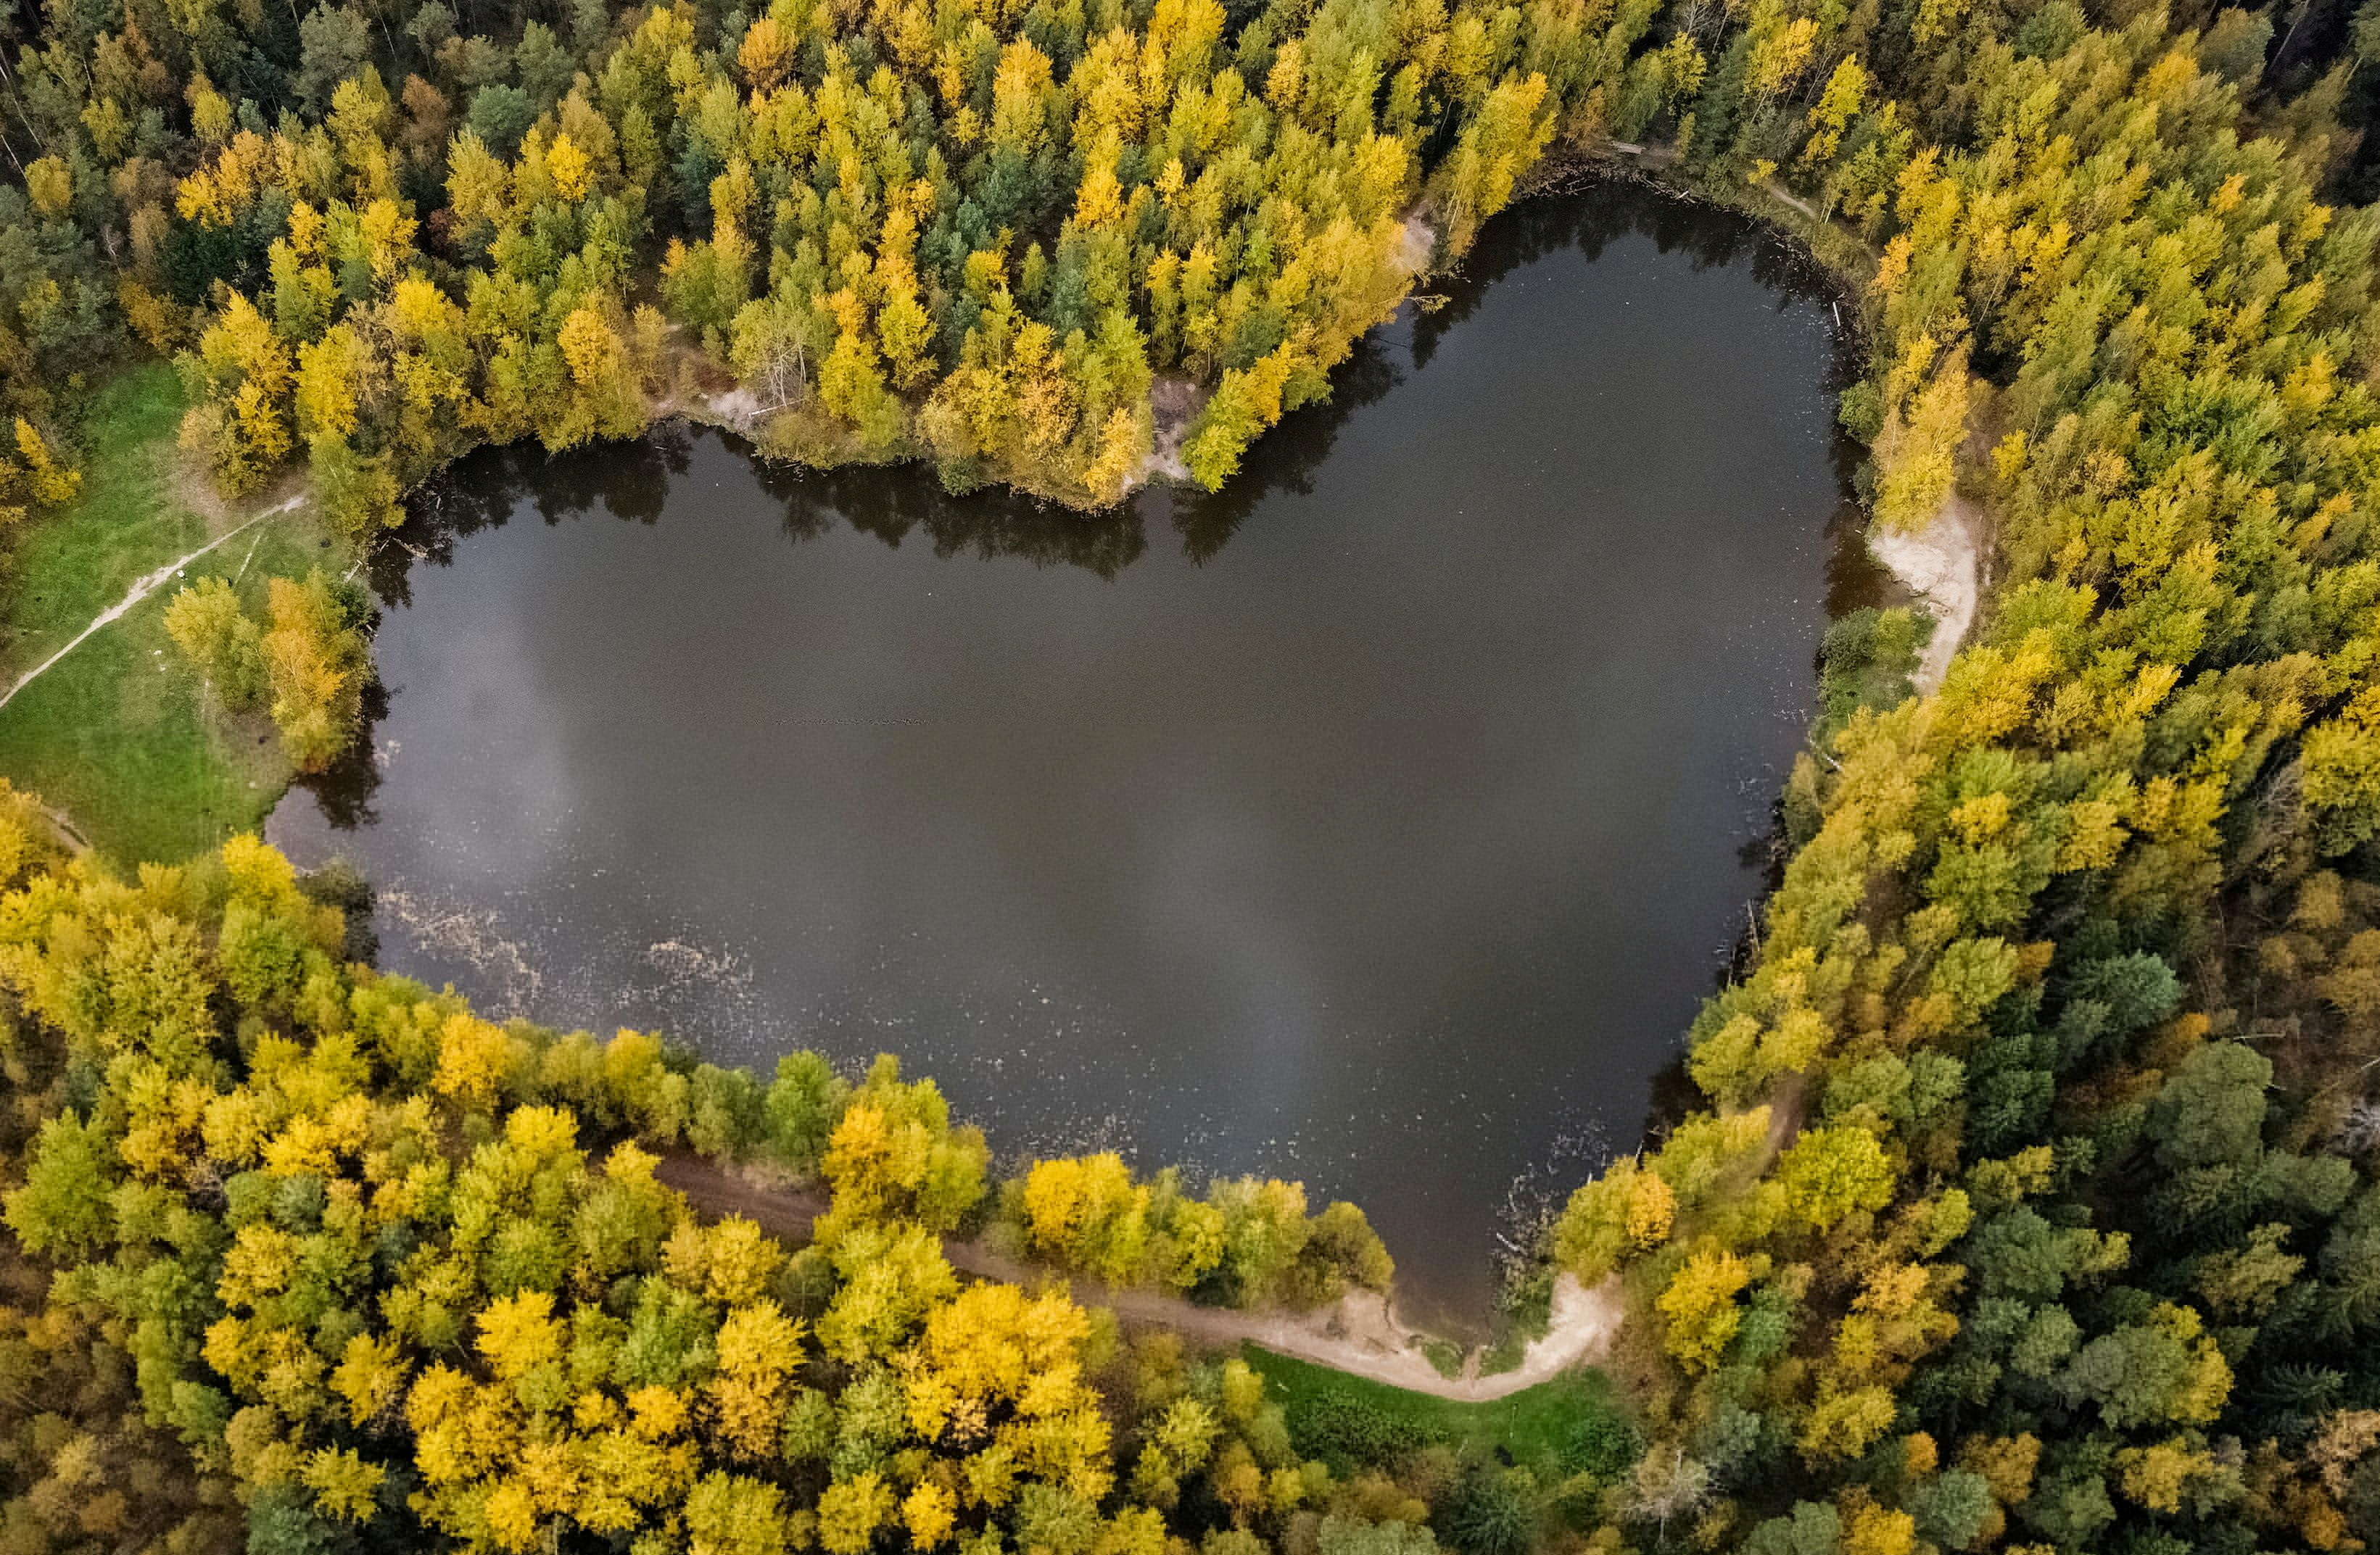 A lake in a shape of a heart is seen surrounded by autumn-coloured trees outside Balashikha